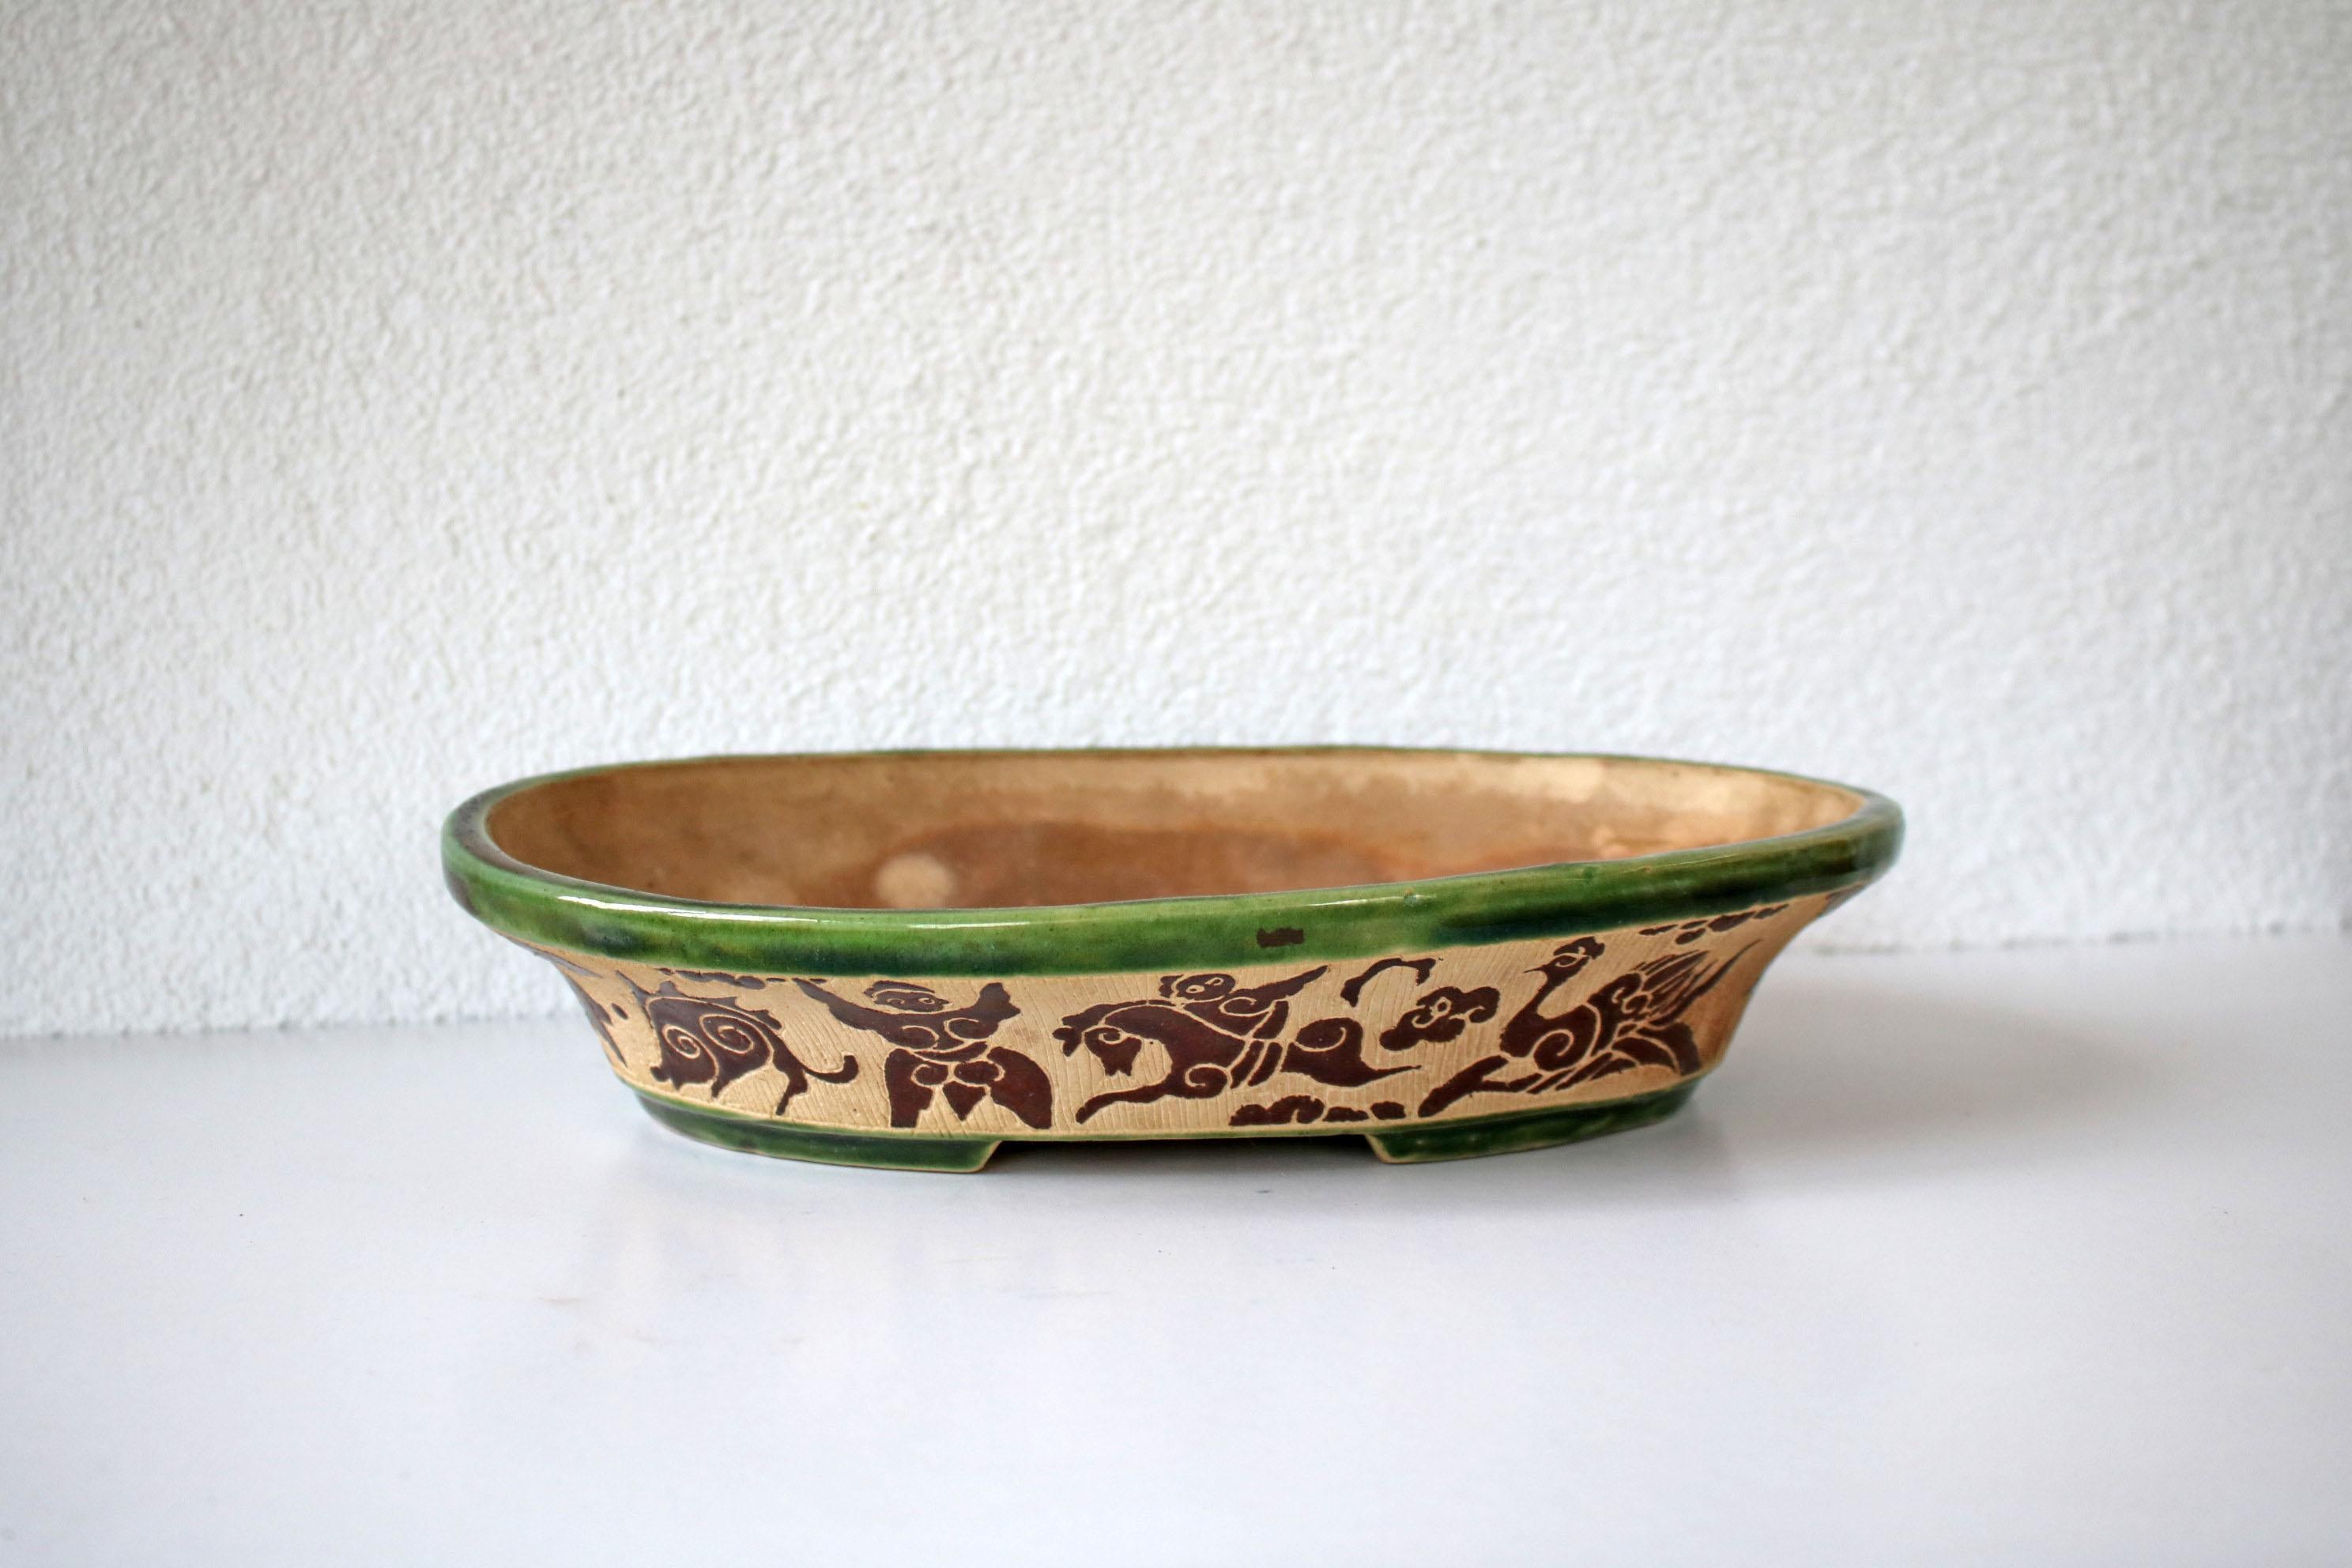 This is a beautiful ceramic glazed fruit bowl. The space around the figures was carved out by hand..